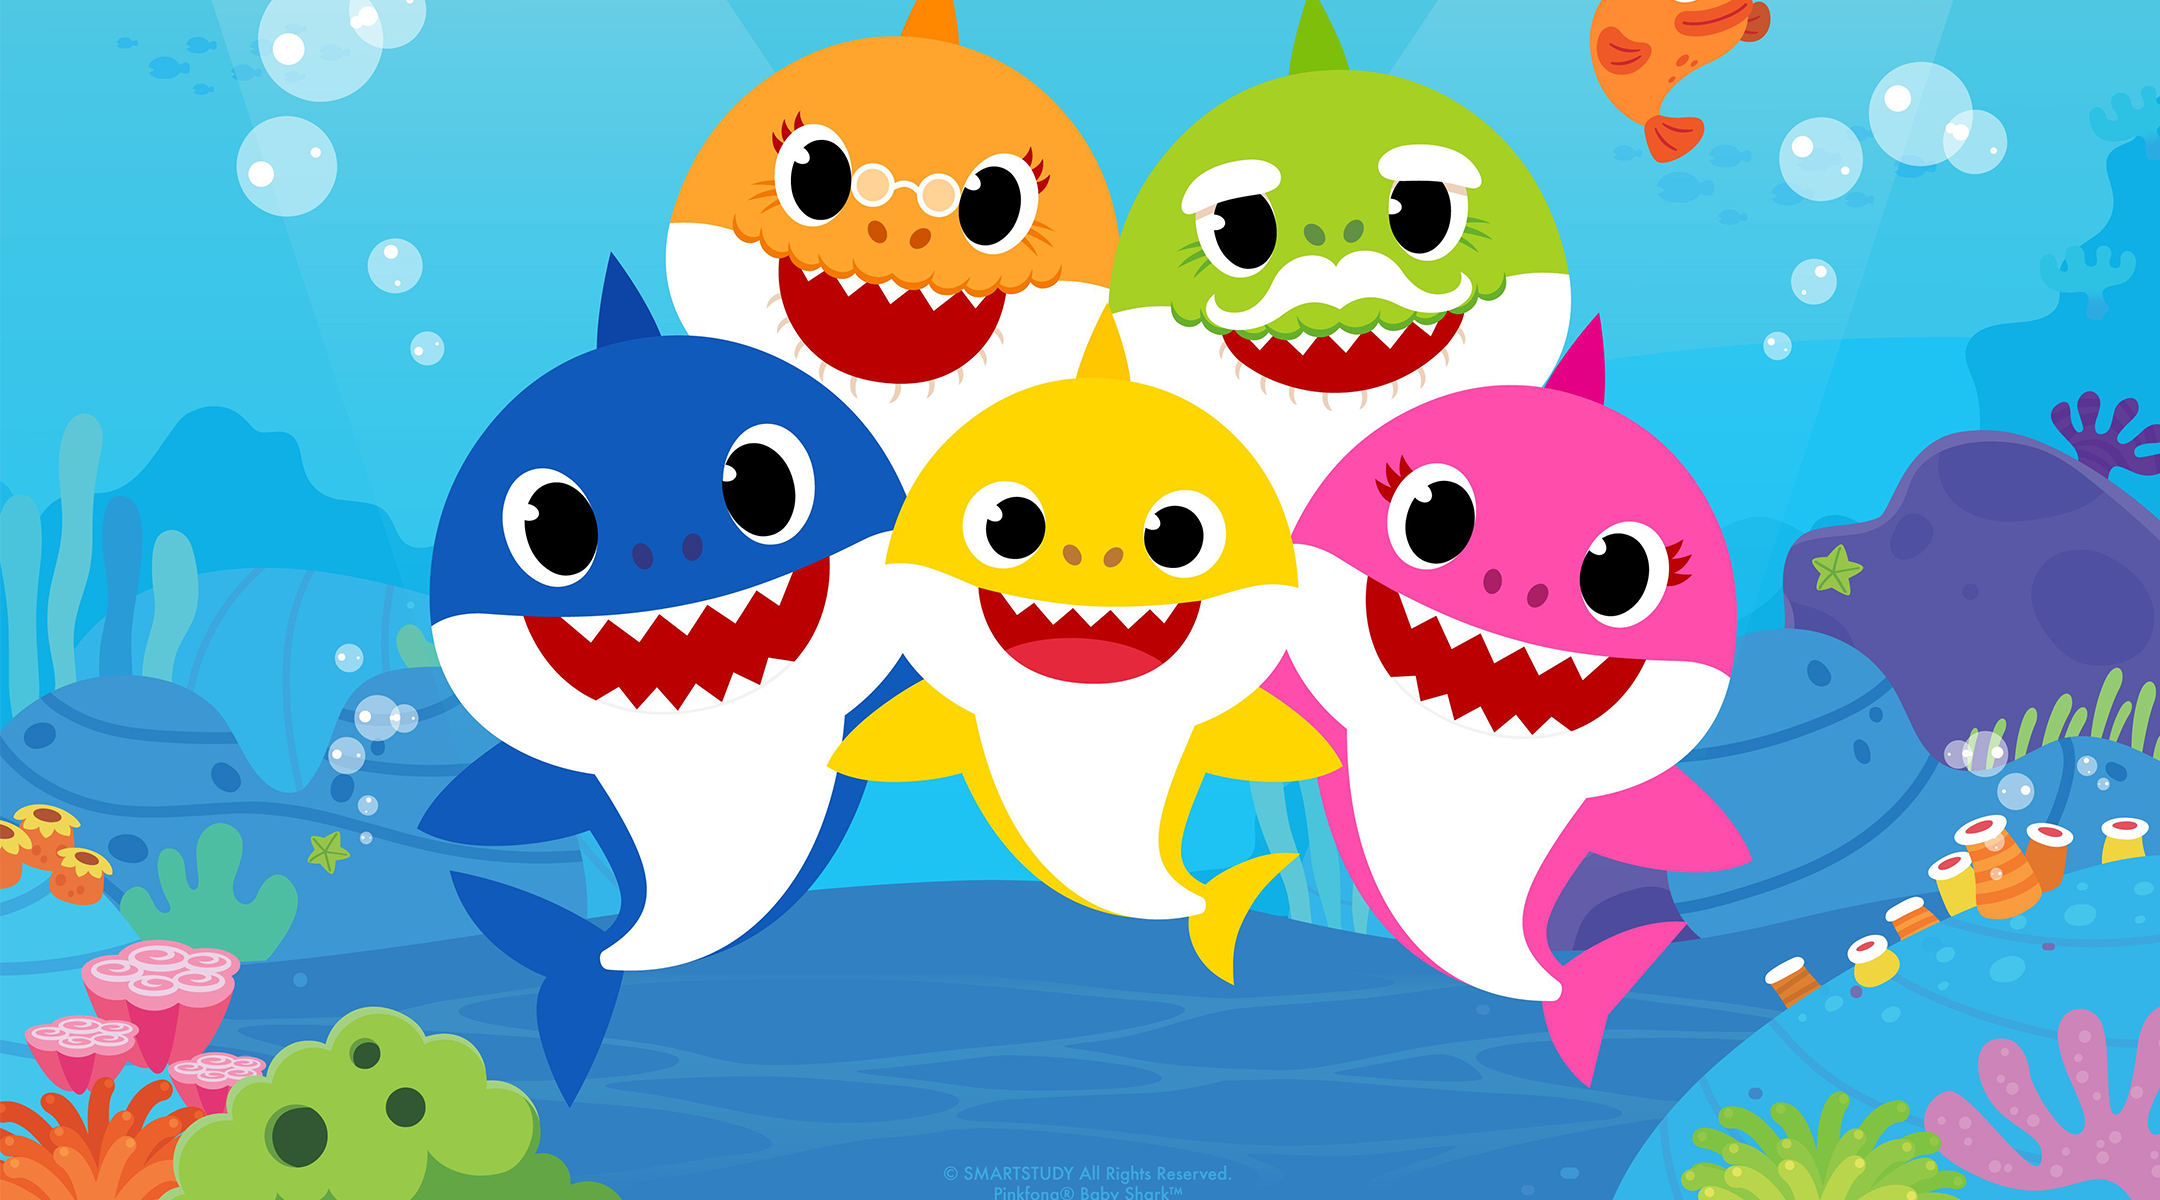 nickledeon partners with pink fong to created baby shark tv series